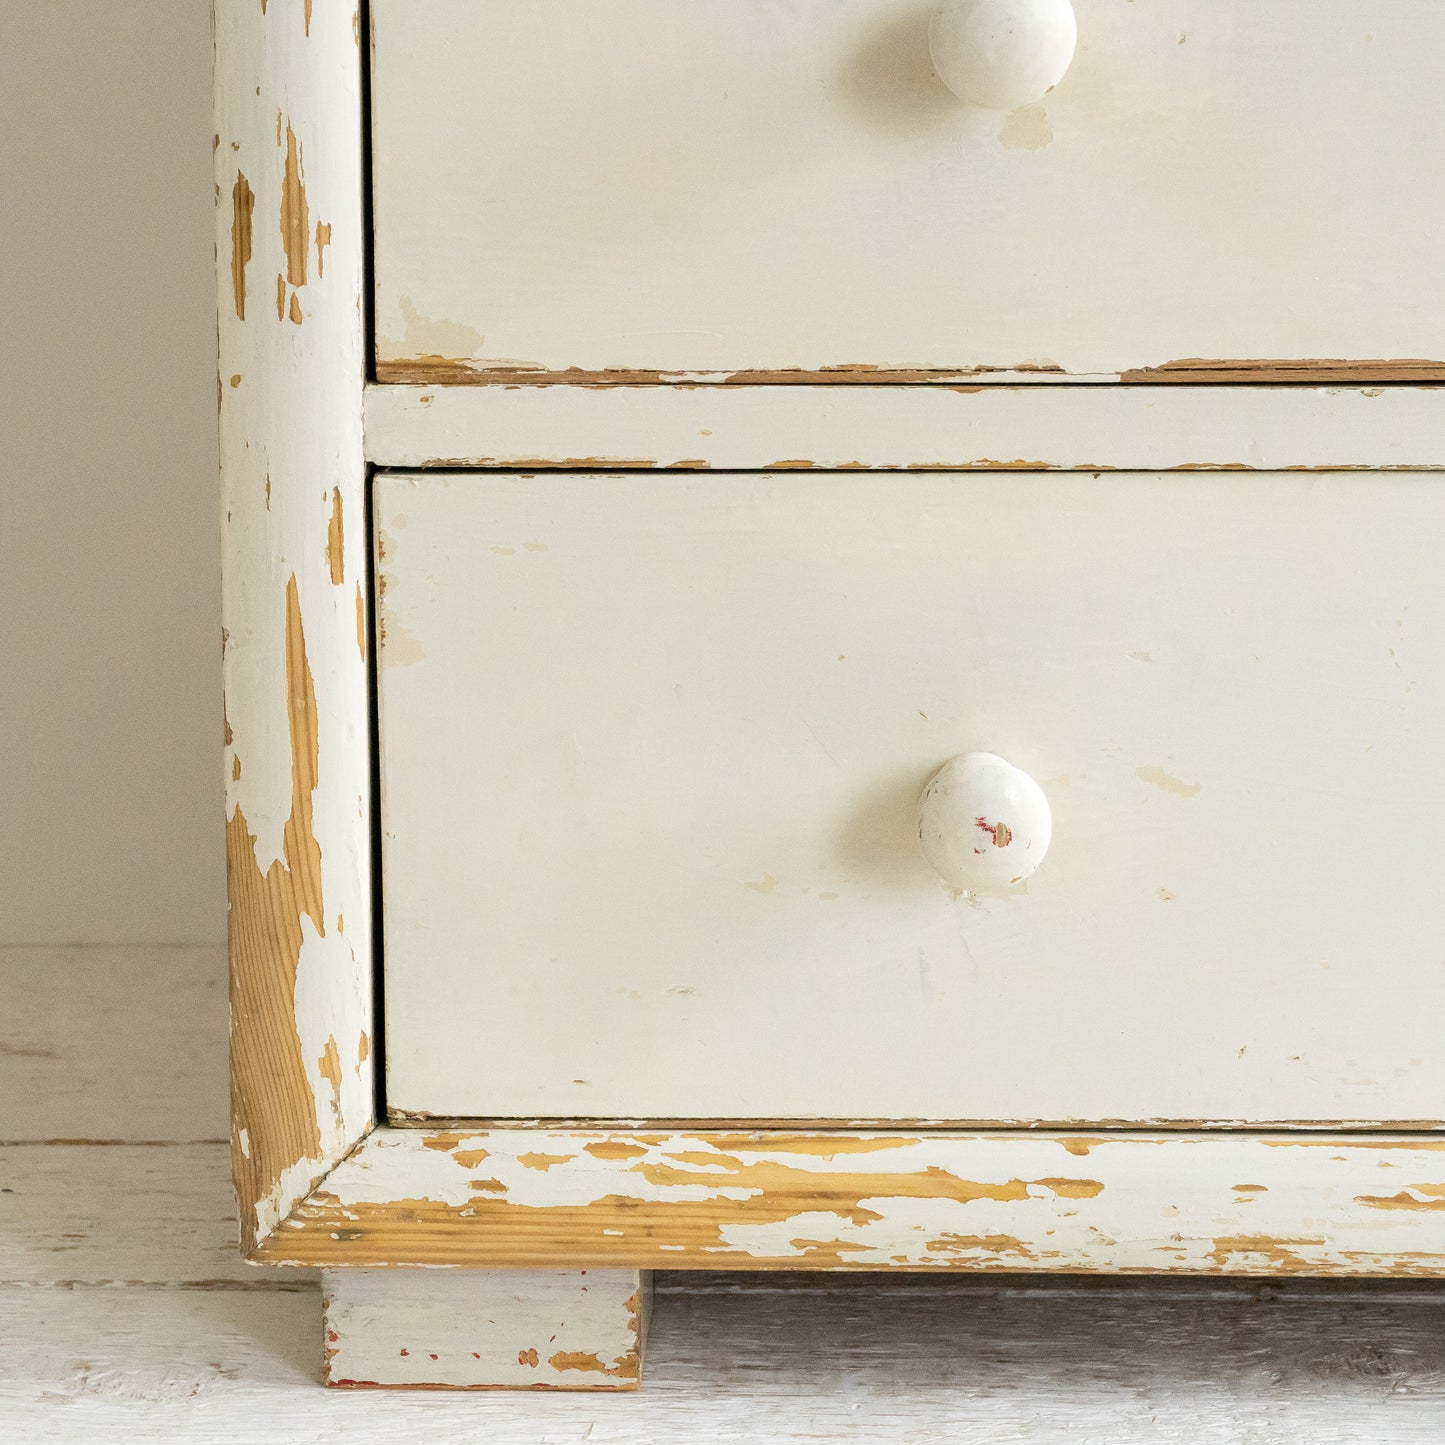 Original Painted Chest of Drawers